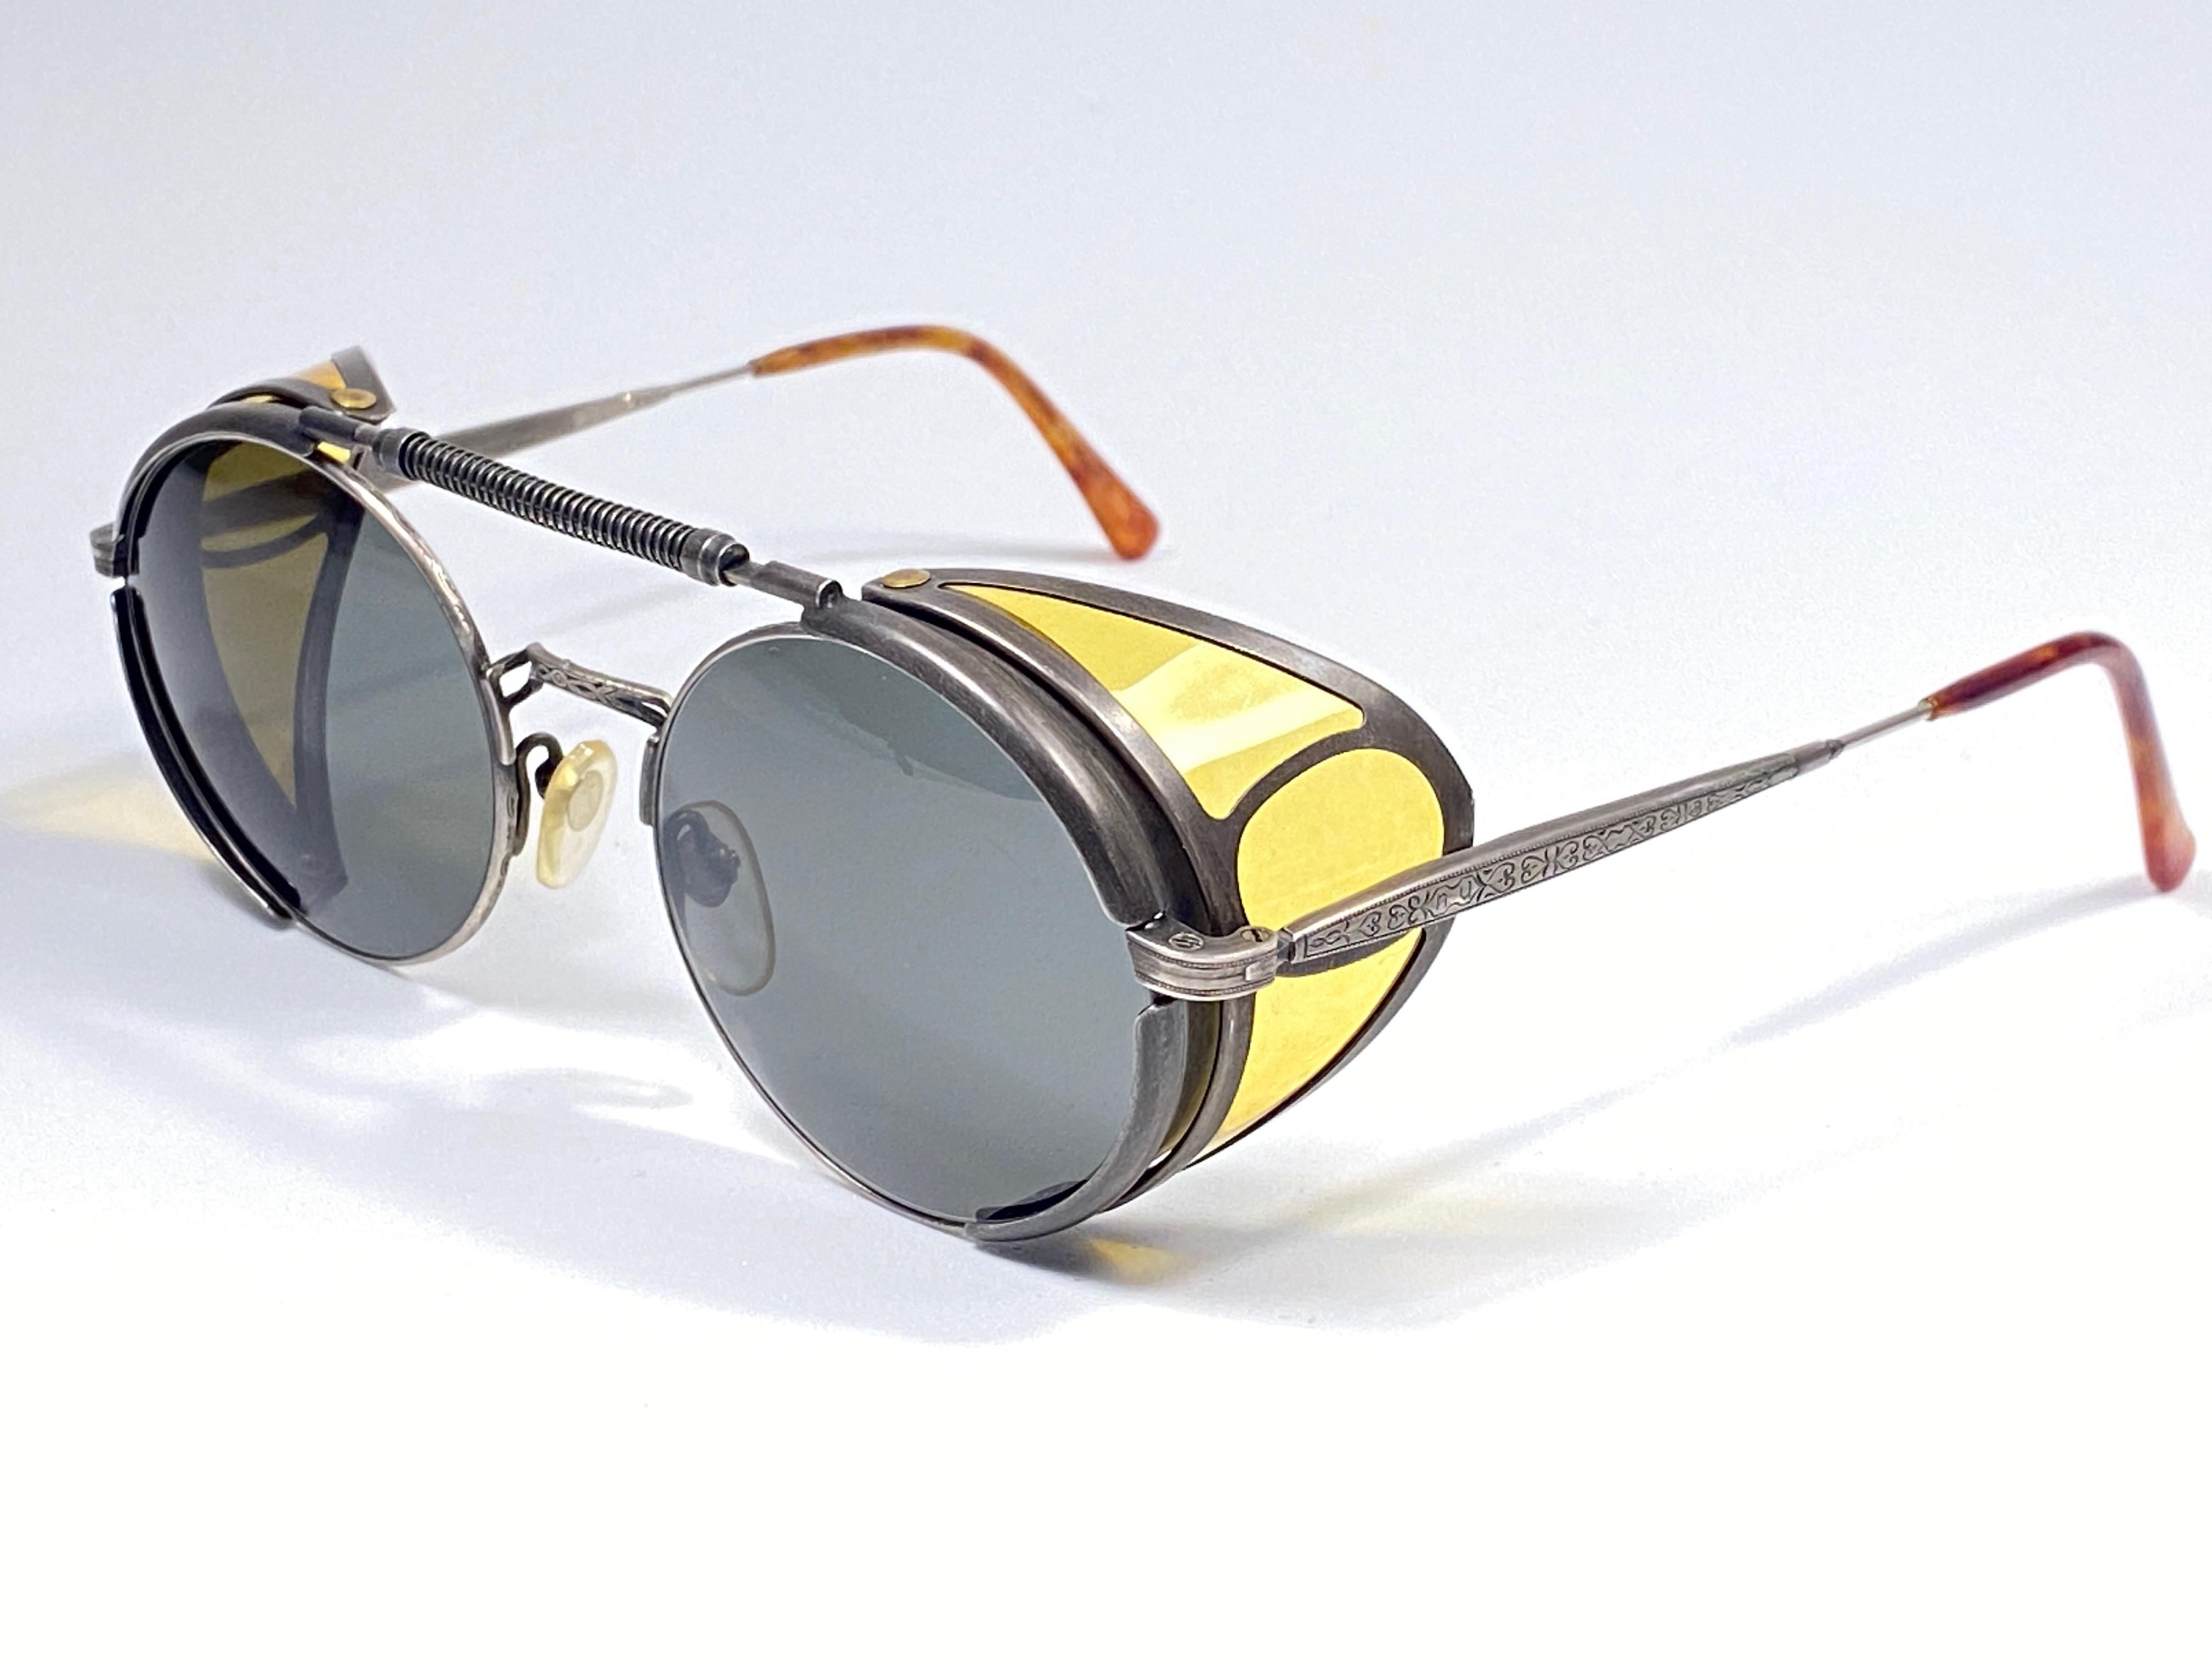 New Vintage Matsuda 2809 Old Silver Collector Item 1990 Made in Japan Sunglasses 2